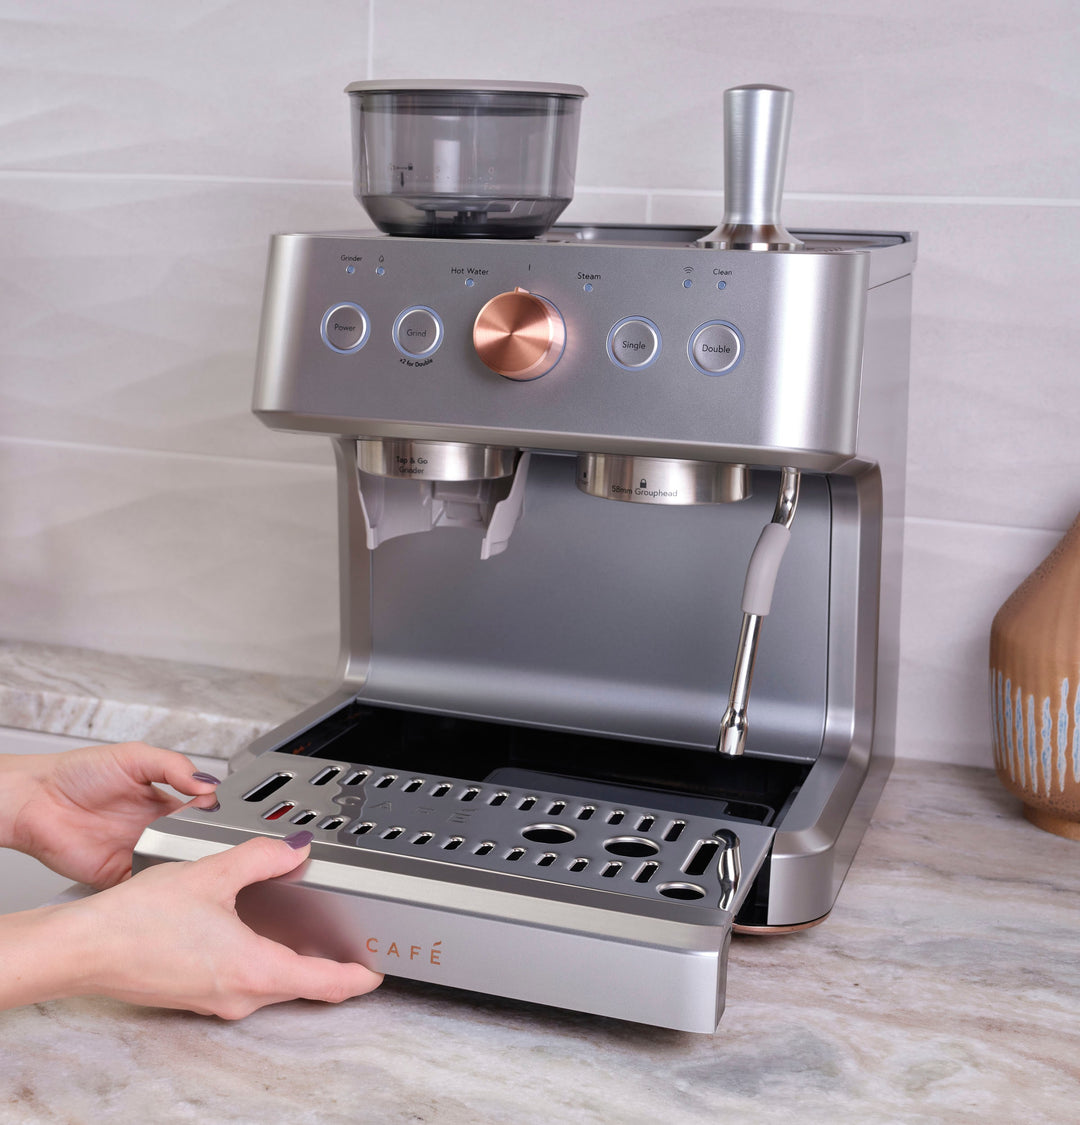 Café - Bellissimo Semi-Automatic Espresso Machine with 15 bars of pressure, Milk Frother, and Built-In Wi-Fi - Steel Silver_18